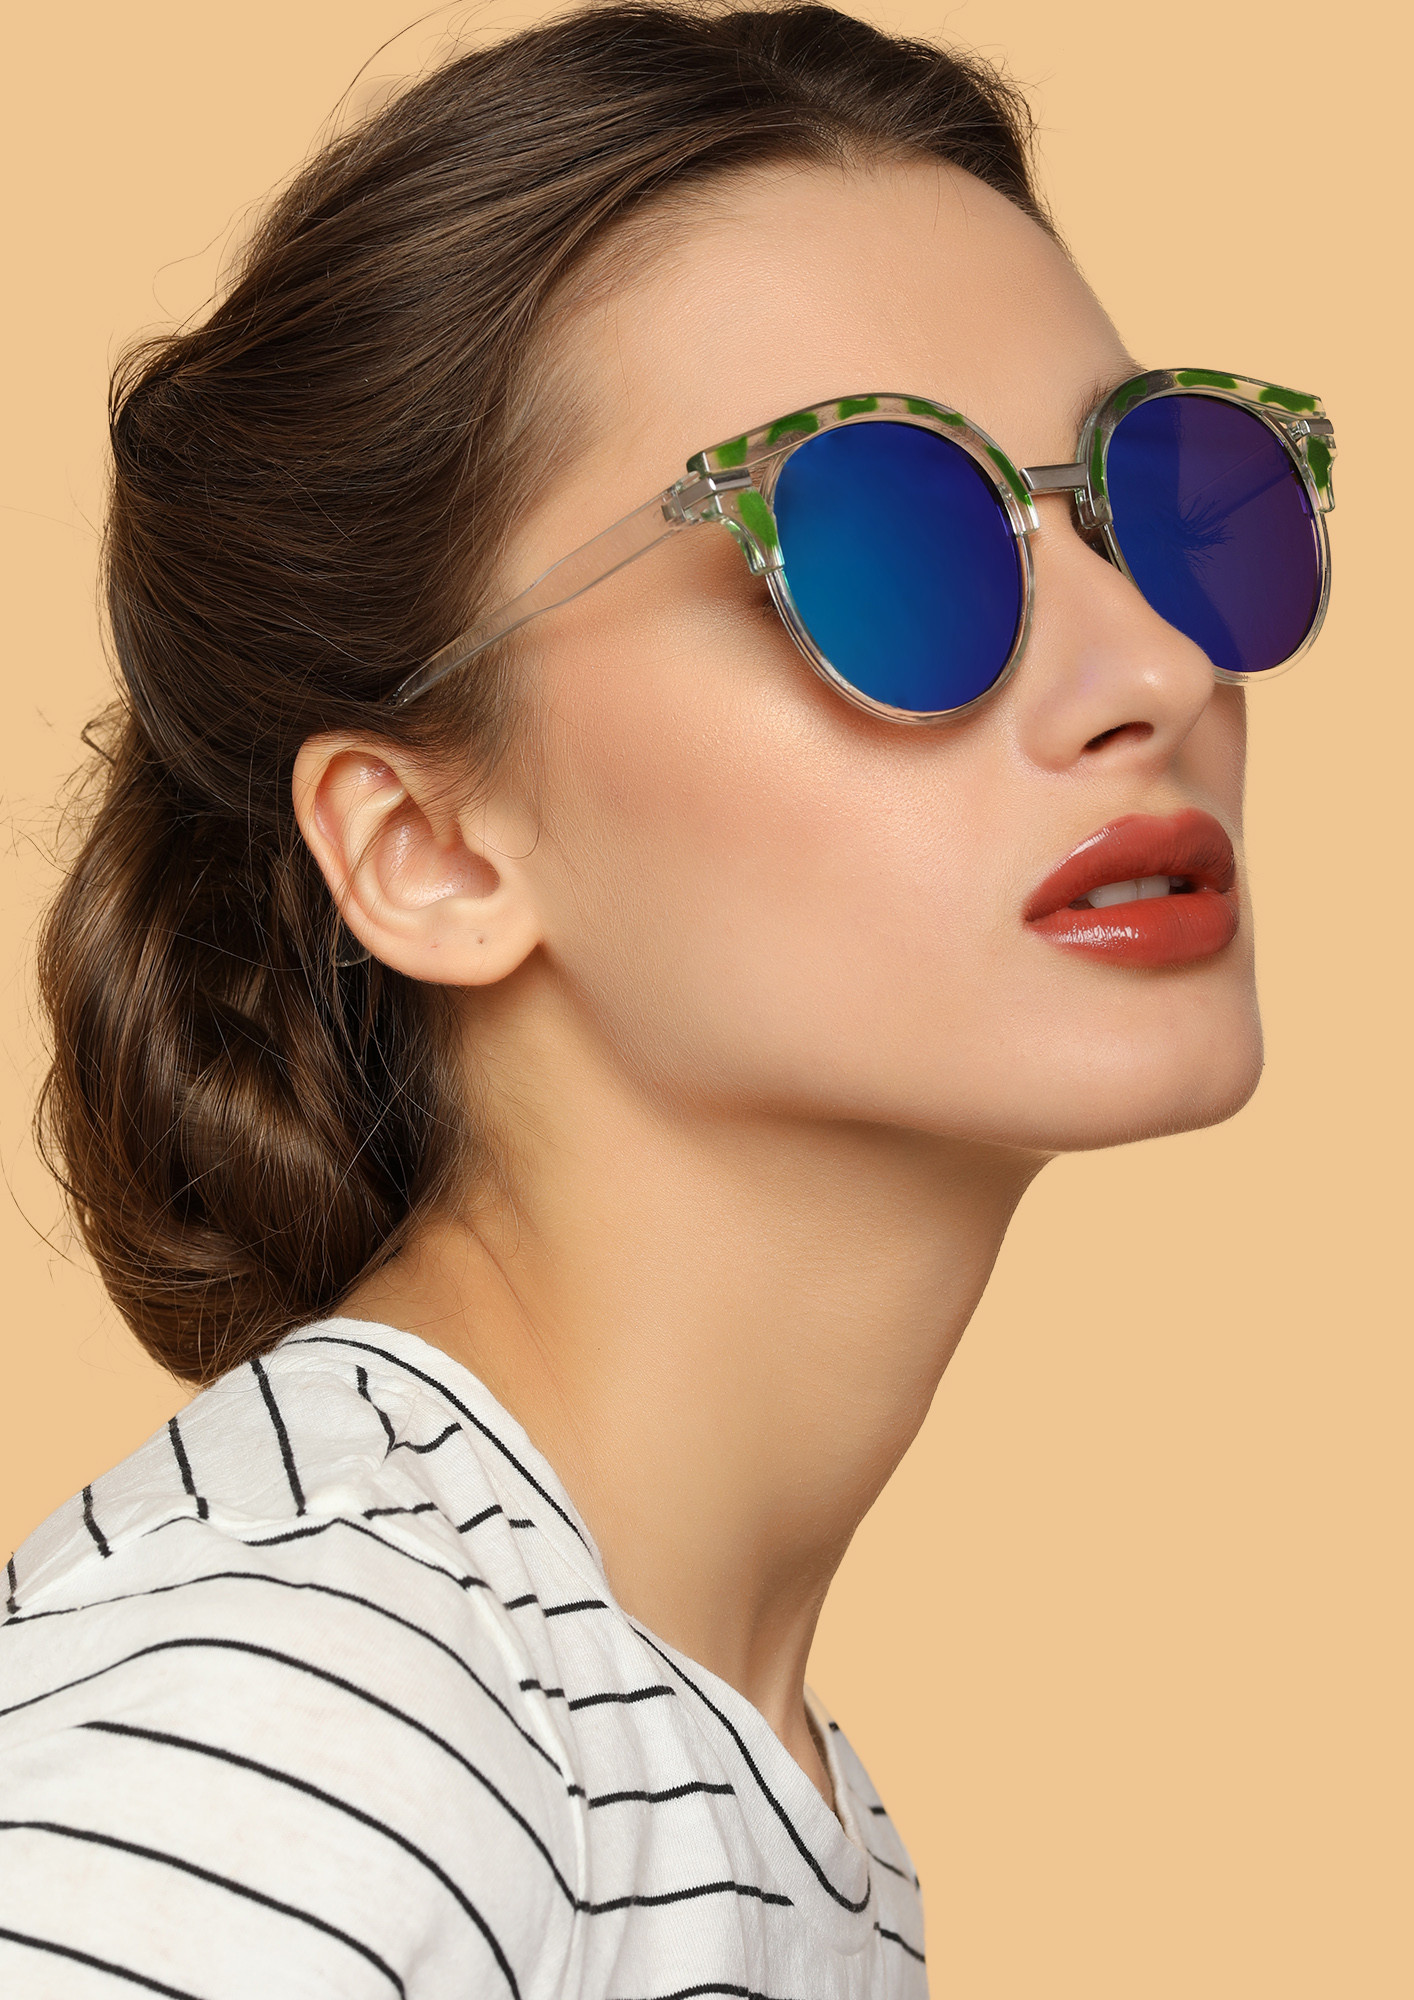 FOR THE BEACH BABE- GREEN CATEYE SUNGLASSES